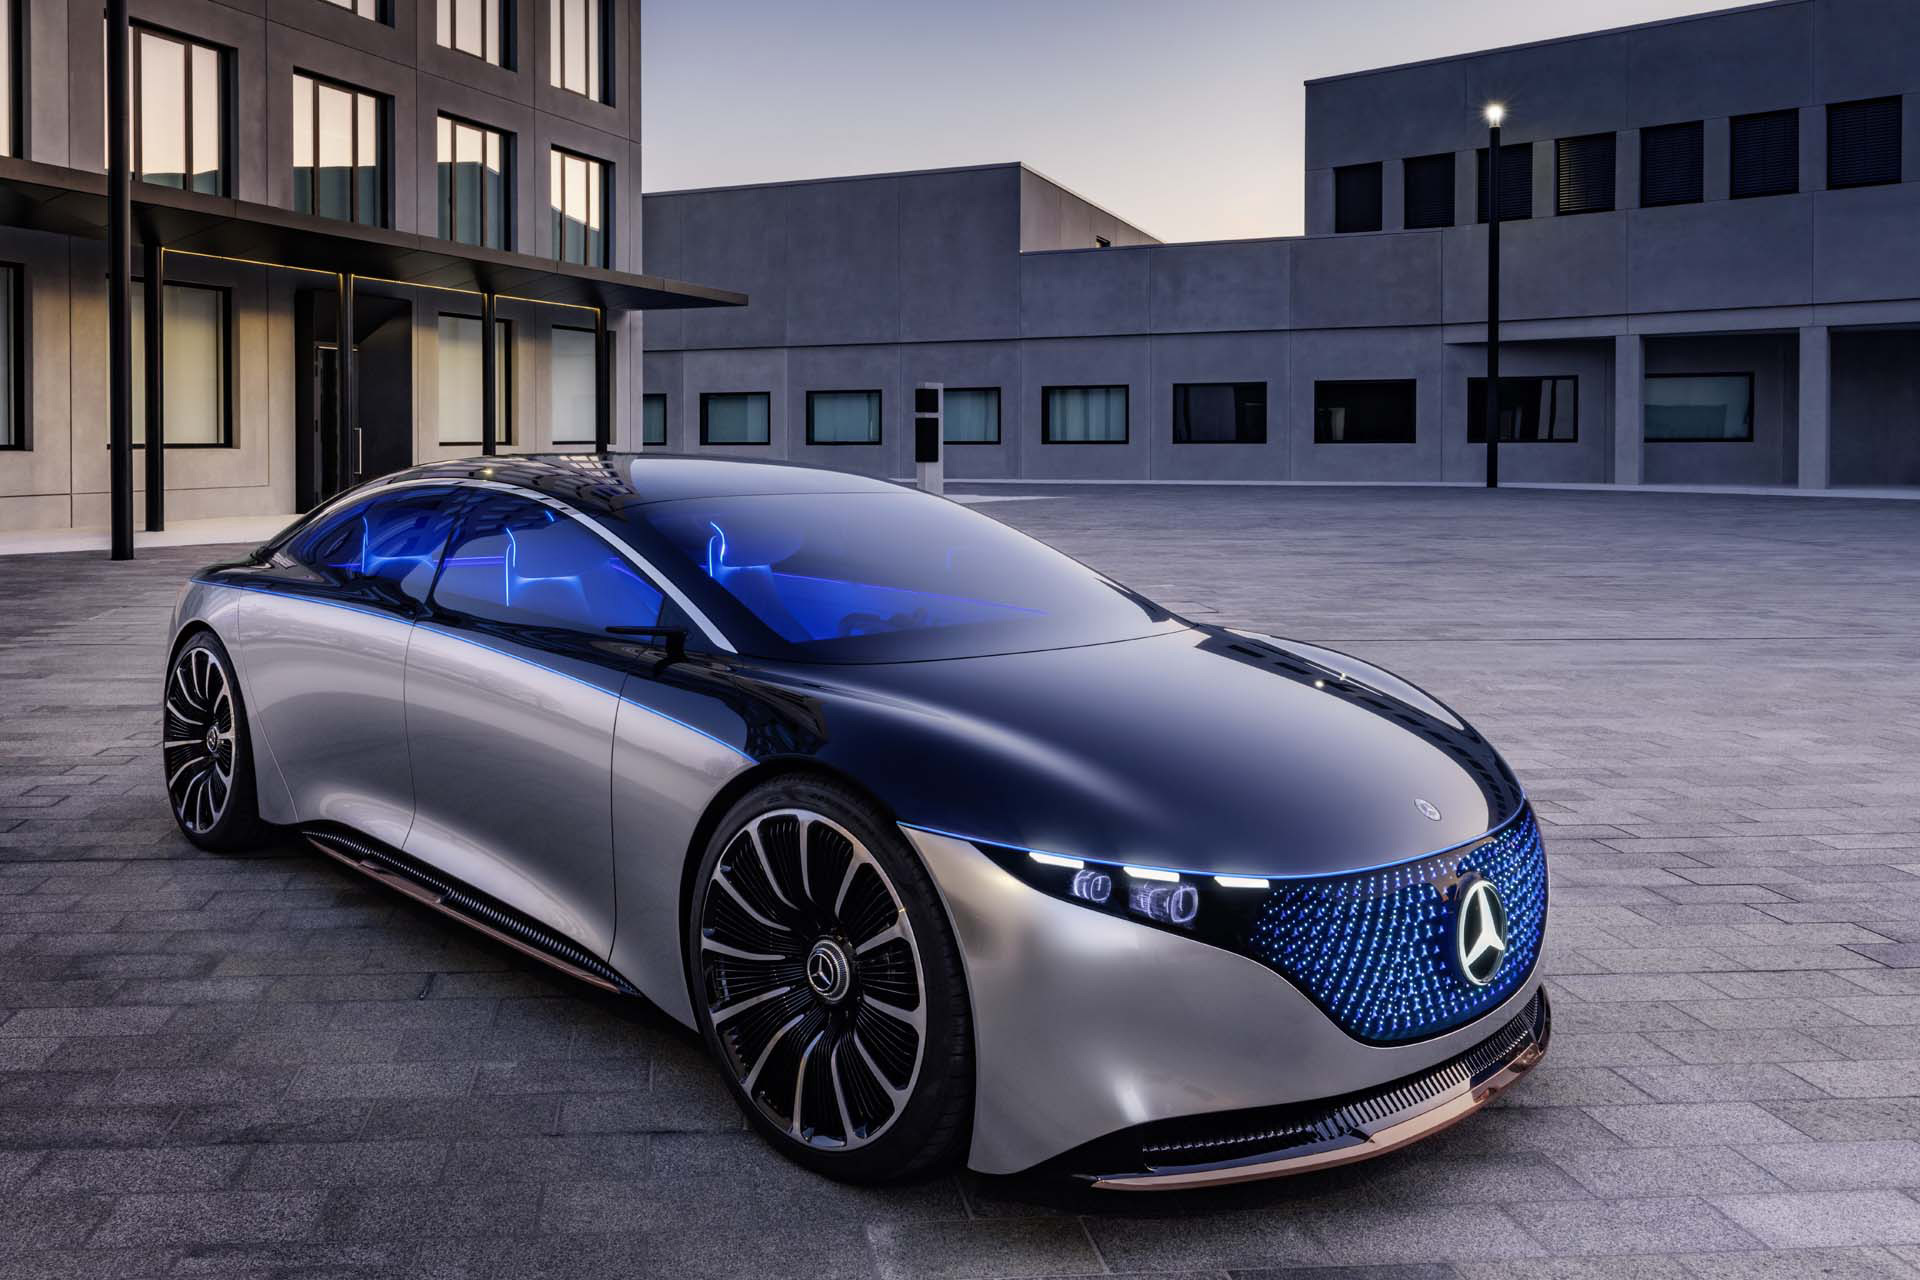 MercedesBenz Vision EQS rethinks the SClass as allelectric